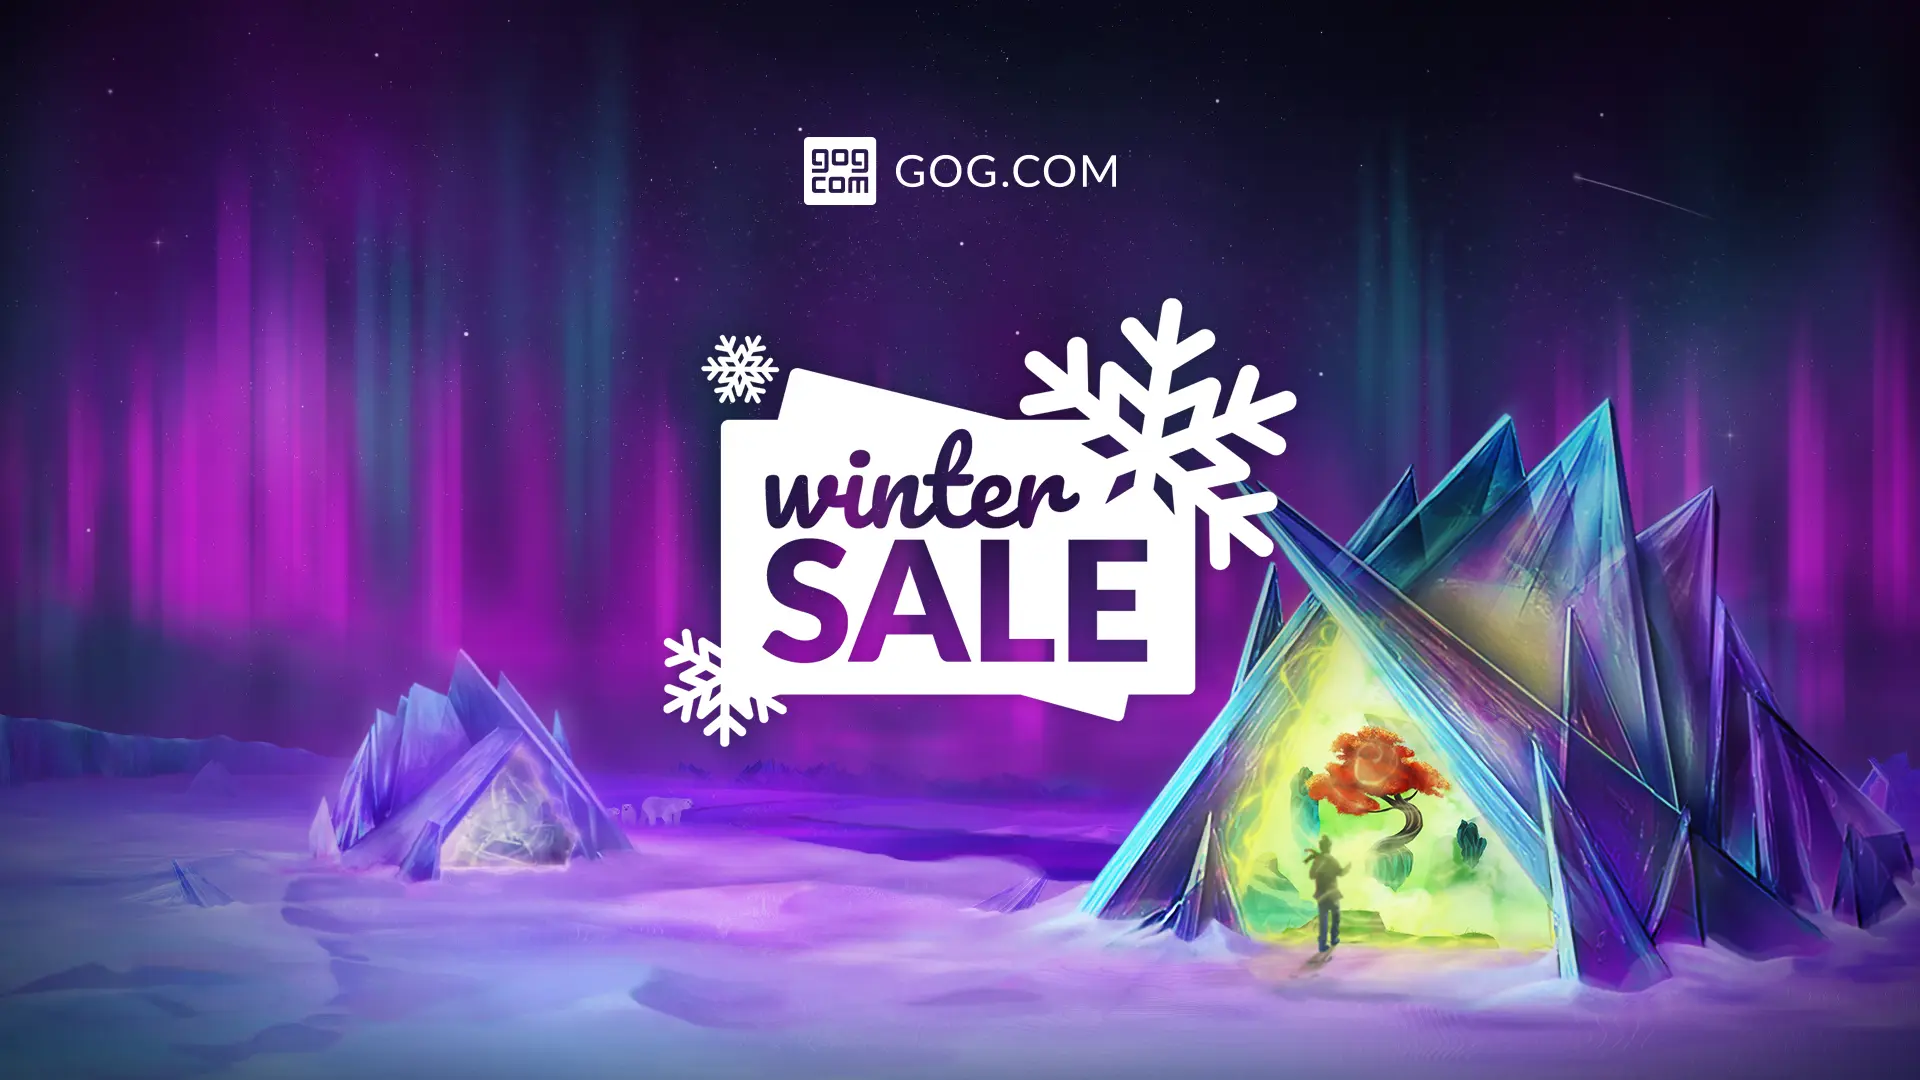 GOG Announces Winter Sale Grand Finale- Giveaway And Deals